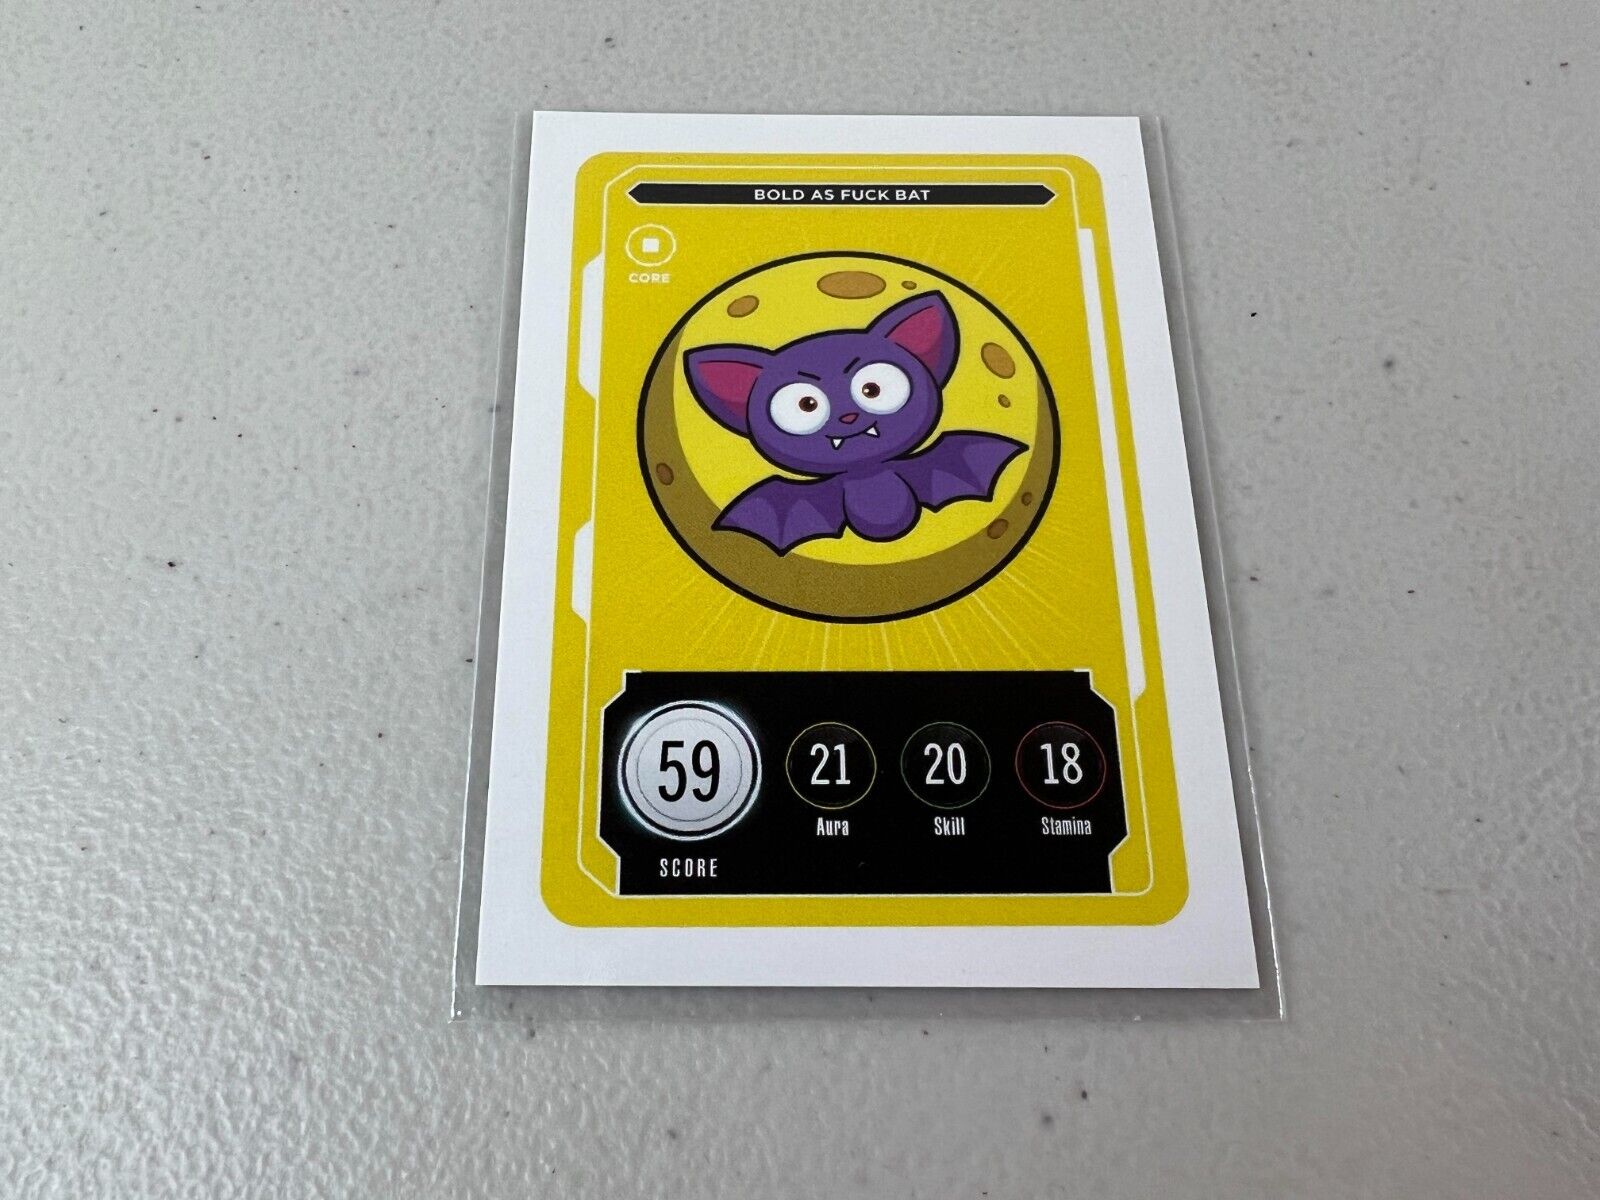 VeeFriends Bold as F*** Bat Series 2 Core Card Compete and Collect Gary Vee